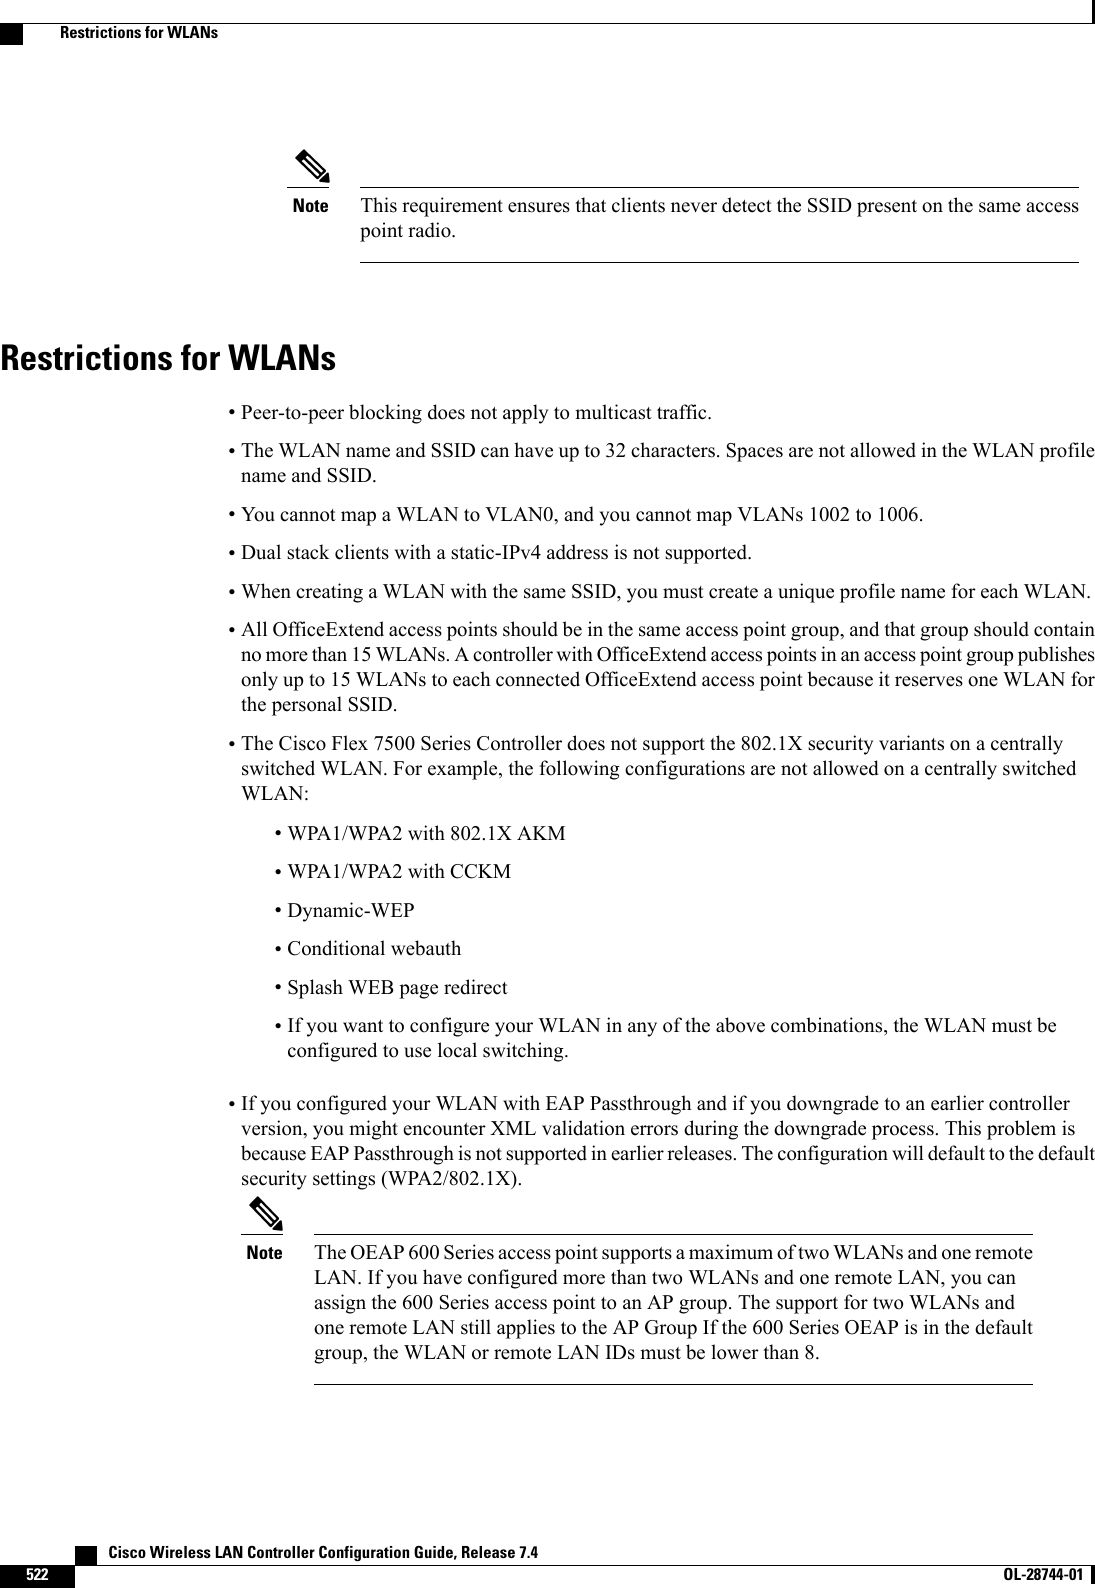 This requirement ensures that clients never detect the SSID present on the same accesspoint radio.NoteRestrictions for WLANs•Peer-to-peer blocking does not apply to multicast traffic.•The WLAN name and SSID can have up to 32 characters. Spaces are not allowed in the WLAN profilename and SSID.•You cannot map a WLAN to VLAN0, and you cannot map VLANs 1002 to 1006.•Dual stack clients with a static-IPv4 address is not supported.•When creating a WLAN with the same SSID, you must create a unique profile name for each WLAN.•All OfficeExtend access points should be in the same access point group, and that group should containno more than 15 WLANs. A controller with OfficeExtend access points in an access point group publishesonly up to 15 WLANs to each connected OfficeExtend access point because it reserves one WLAN forthe personal SSID.•The Cisco Flex 7500 Series Controller does not support the 802.1X security variants on a centrallyswitched WLAN. For example, the following configurations are not allowed on a centrally switchedWLAN:•WPA1/WPA2 with 802.1X AKM•WPA1/WPA2 with CCKM•Dynamic-WEP•Conditional webauth•Splash WEB page redirect•If you want to configure your WLAN in any of the above combinations, the WLAN must beconfigured to use local switching.•If you configured your WLAN with EAP Passthrough and if you downgrade to an earlier controllerversion, you might encounter XML validation errors during the downgrade process. This problem isbecause EAP Passthrough is not supported in earlier releases. The configuration will default to the defaultsecurity settings (WPA2/802.1X).The OEAP 600 Series access point supports a maximum of two WLANs and one remoteLAN. If you have configured more than two WLANs and one remote LAN, you canassign the 600 Series access point to an AP group. The support for two WLANs andone remote LAN still applies to the AP Group If the 600 Series OEAP is in the defaultgroup, the WLAN or remote LAN IDs must be lower than 8.Note   Cisco Wireless LAN Controller Configuration Guide, Release 7.4522 OL-28744-01  Restrictions for WLANs